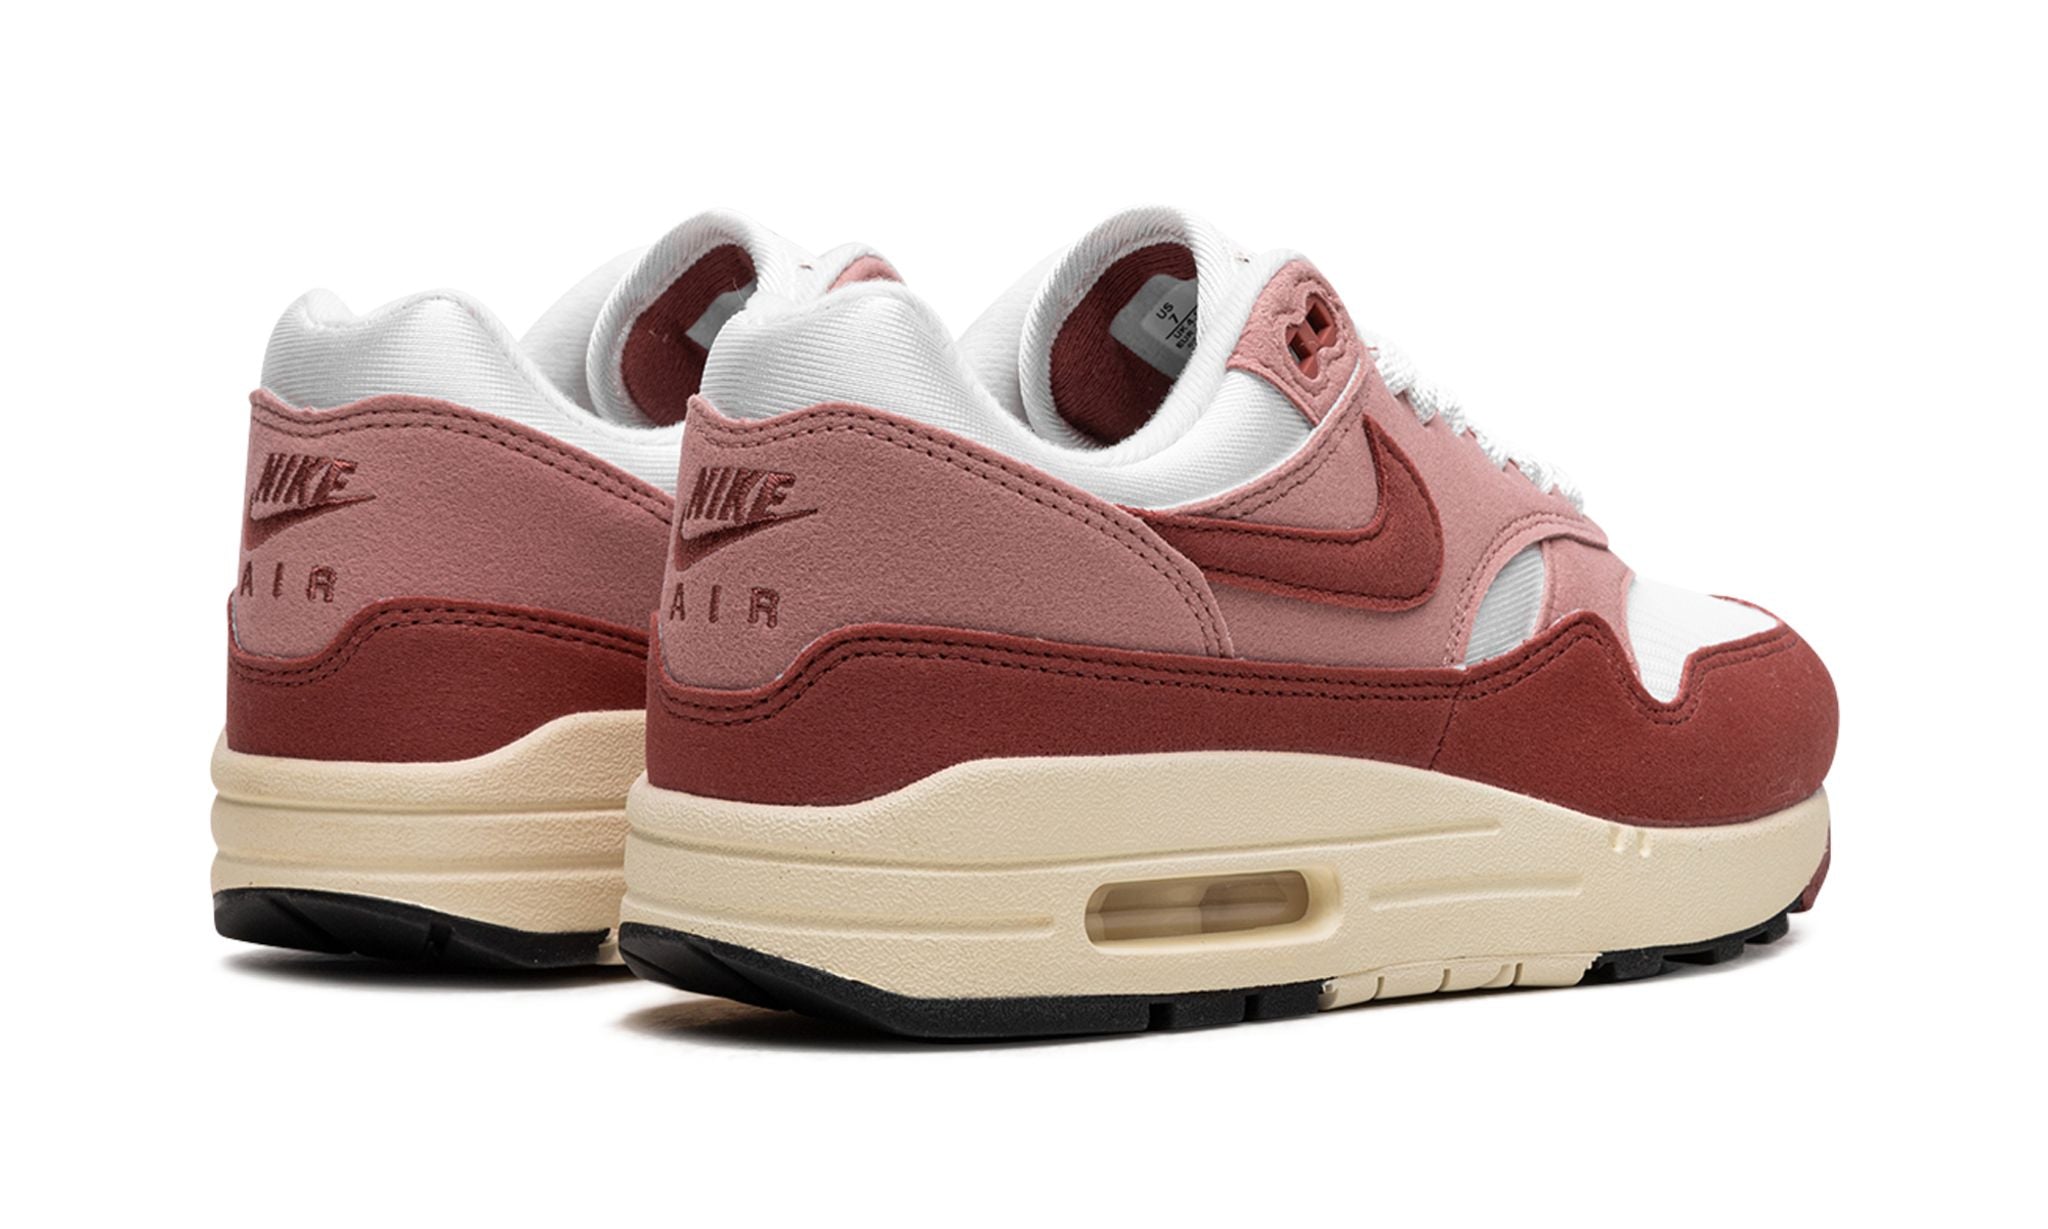 Nike Air Max 1 "Red Stardust" (W)